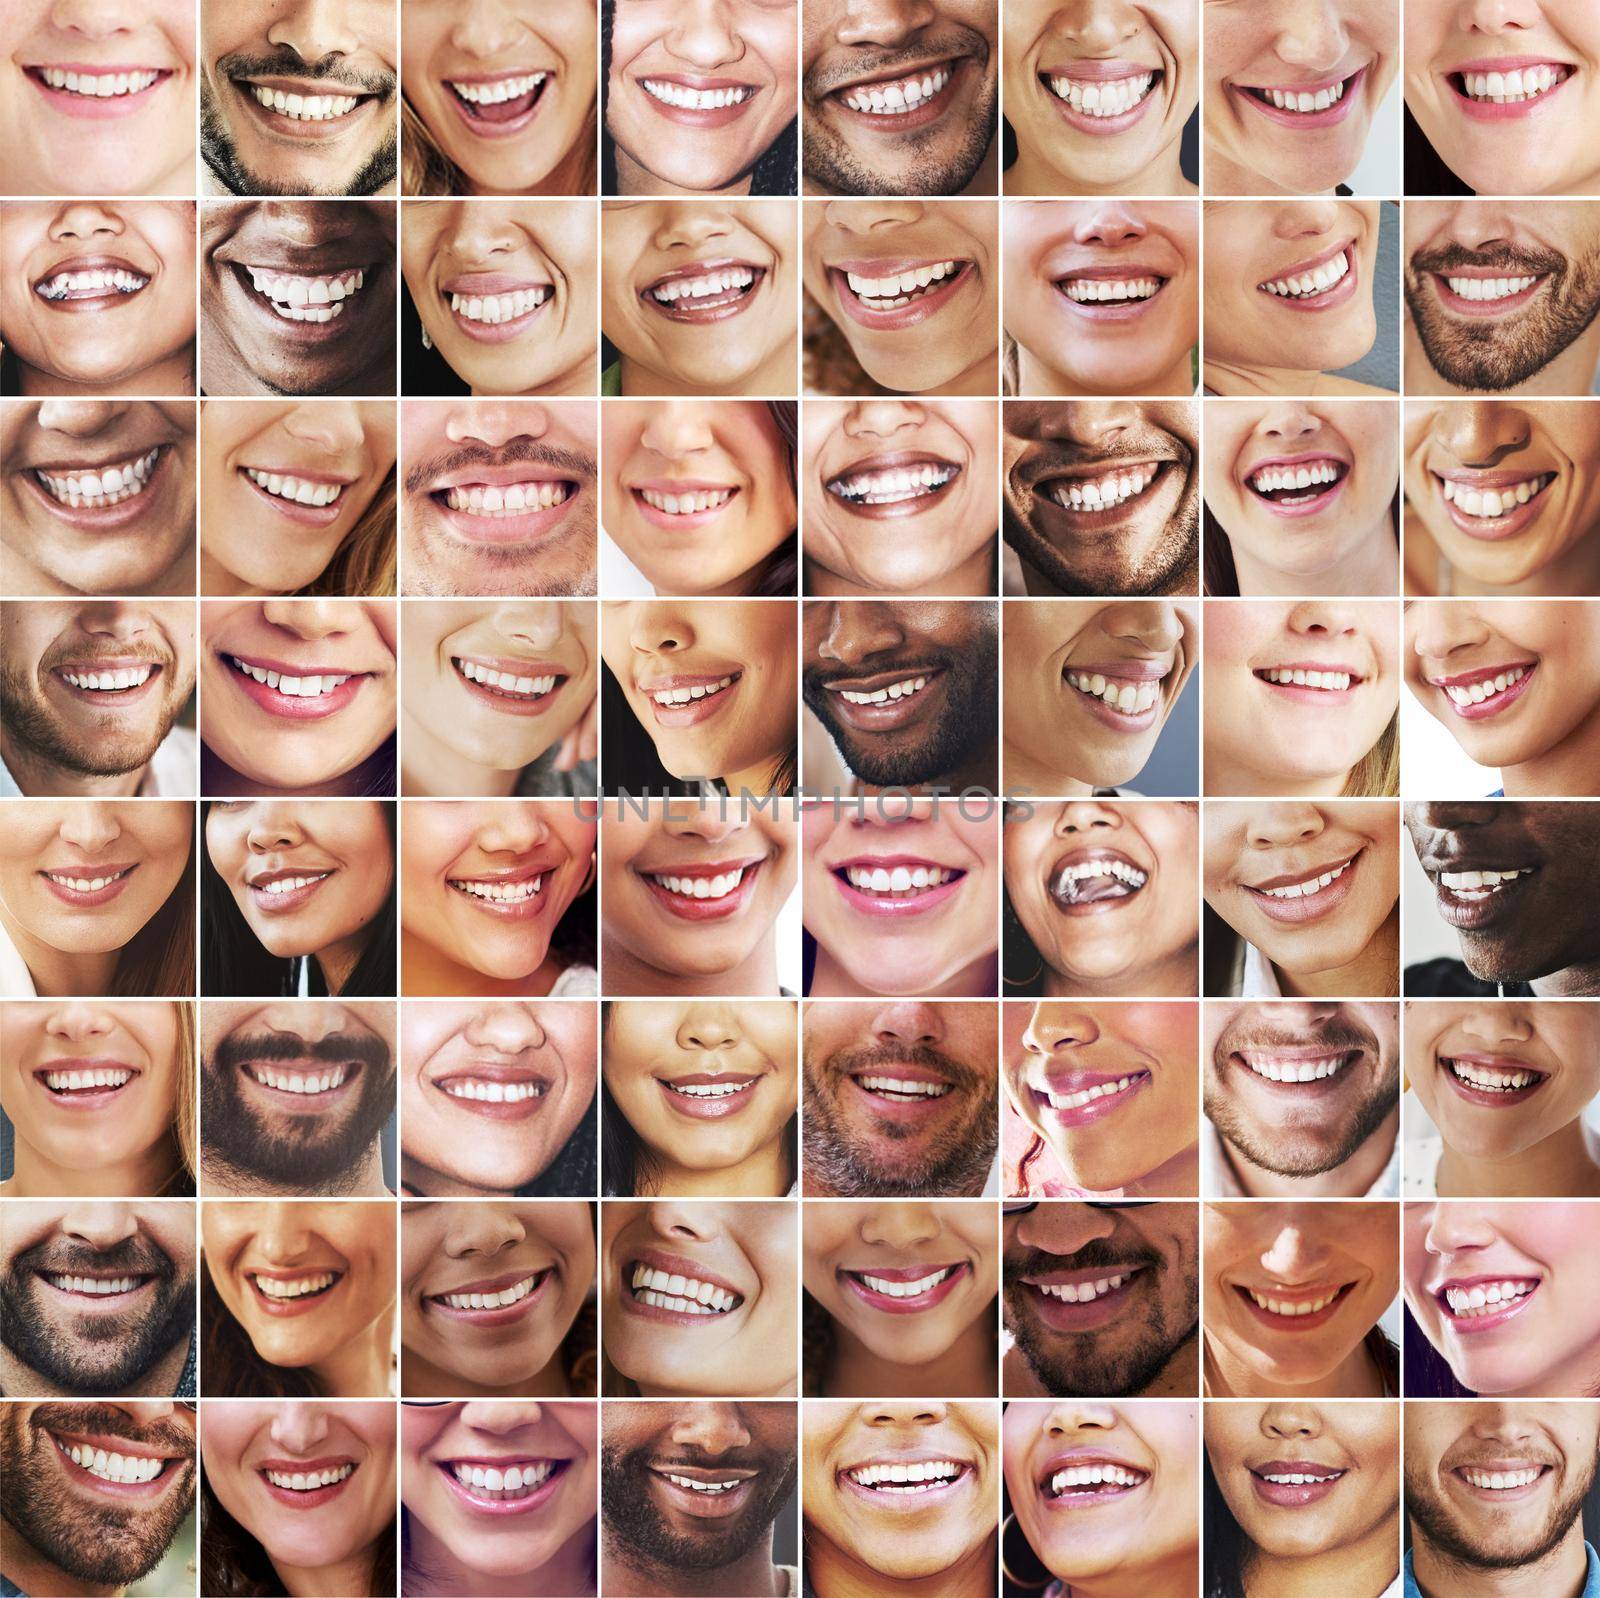 Miles of smiles. Composite image of an assortment of people smiling